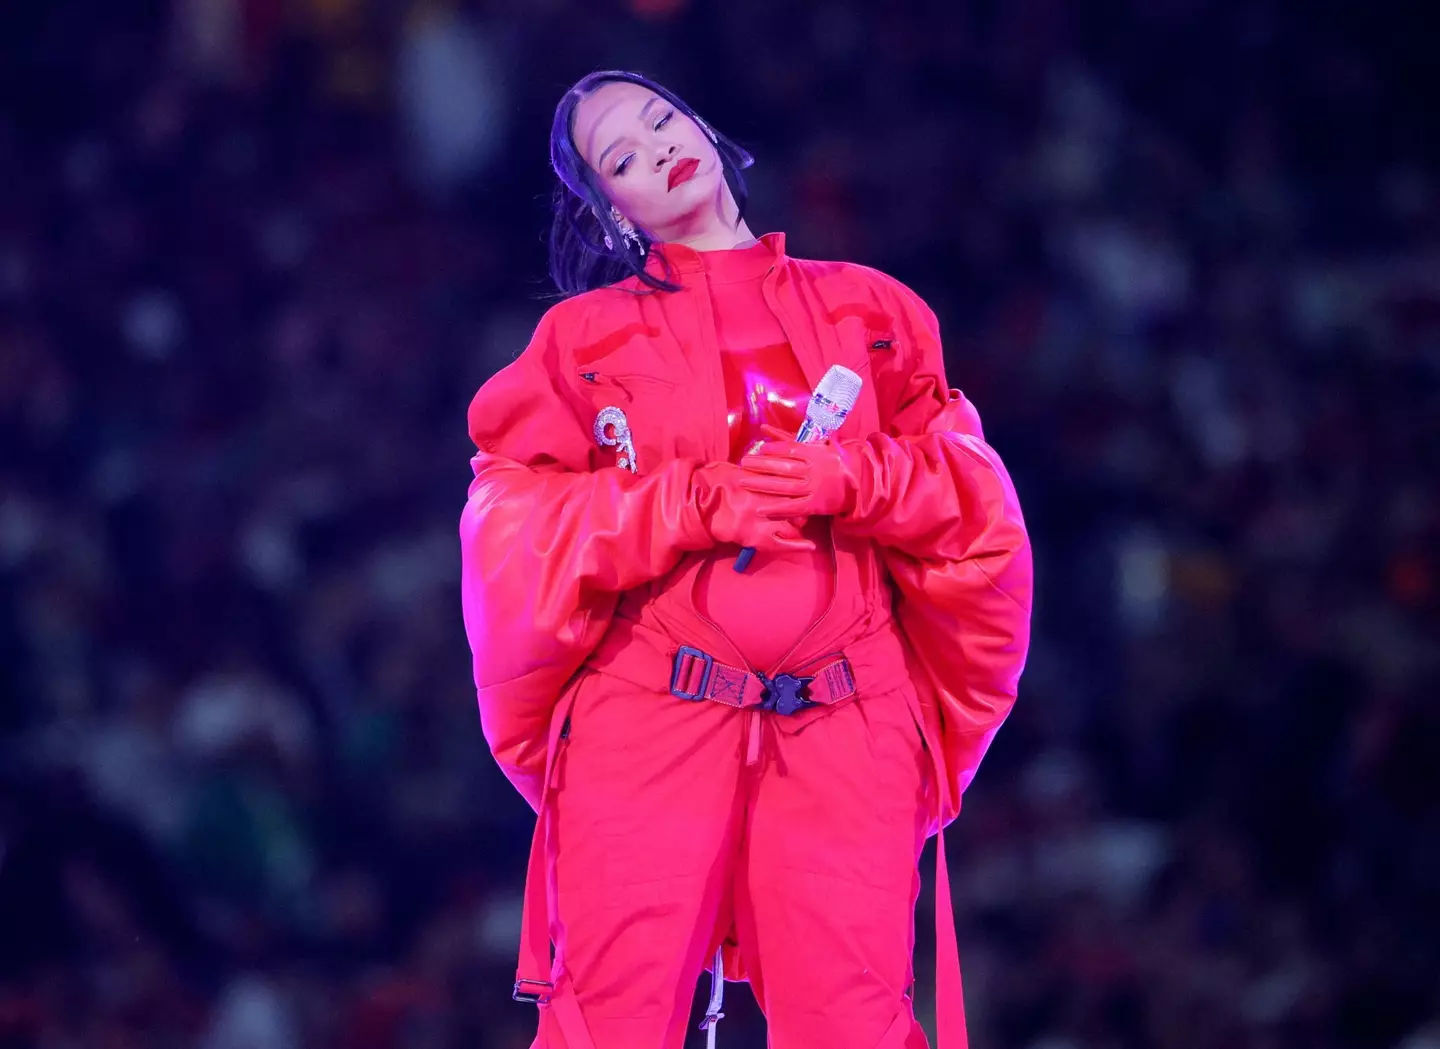 Rihanna revealed she is pregnant during the performance.